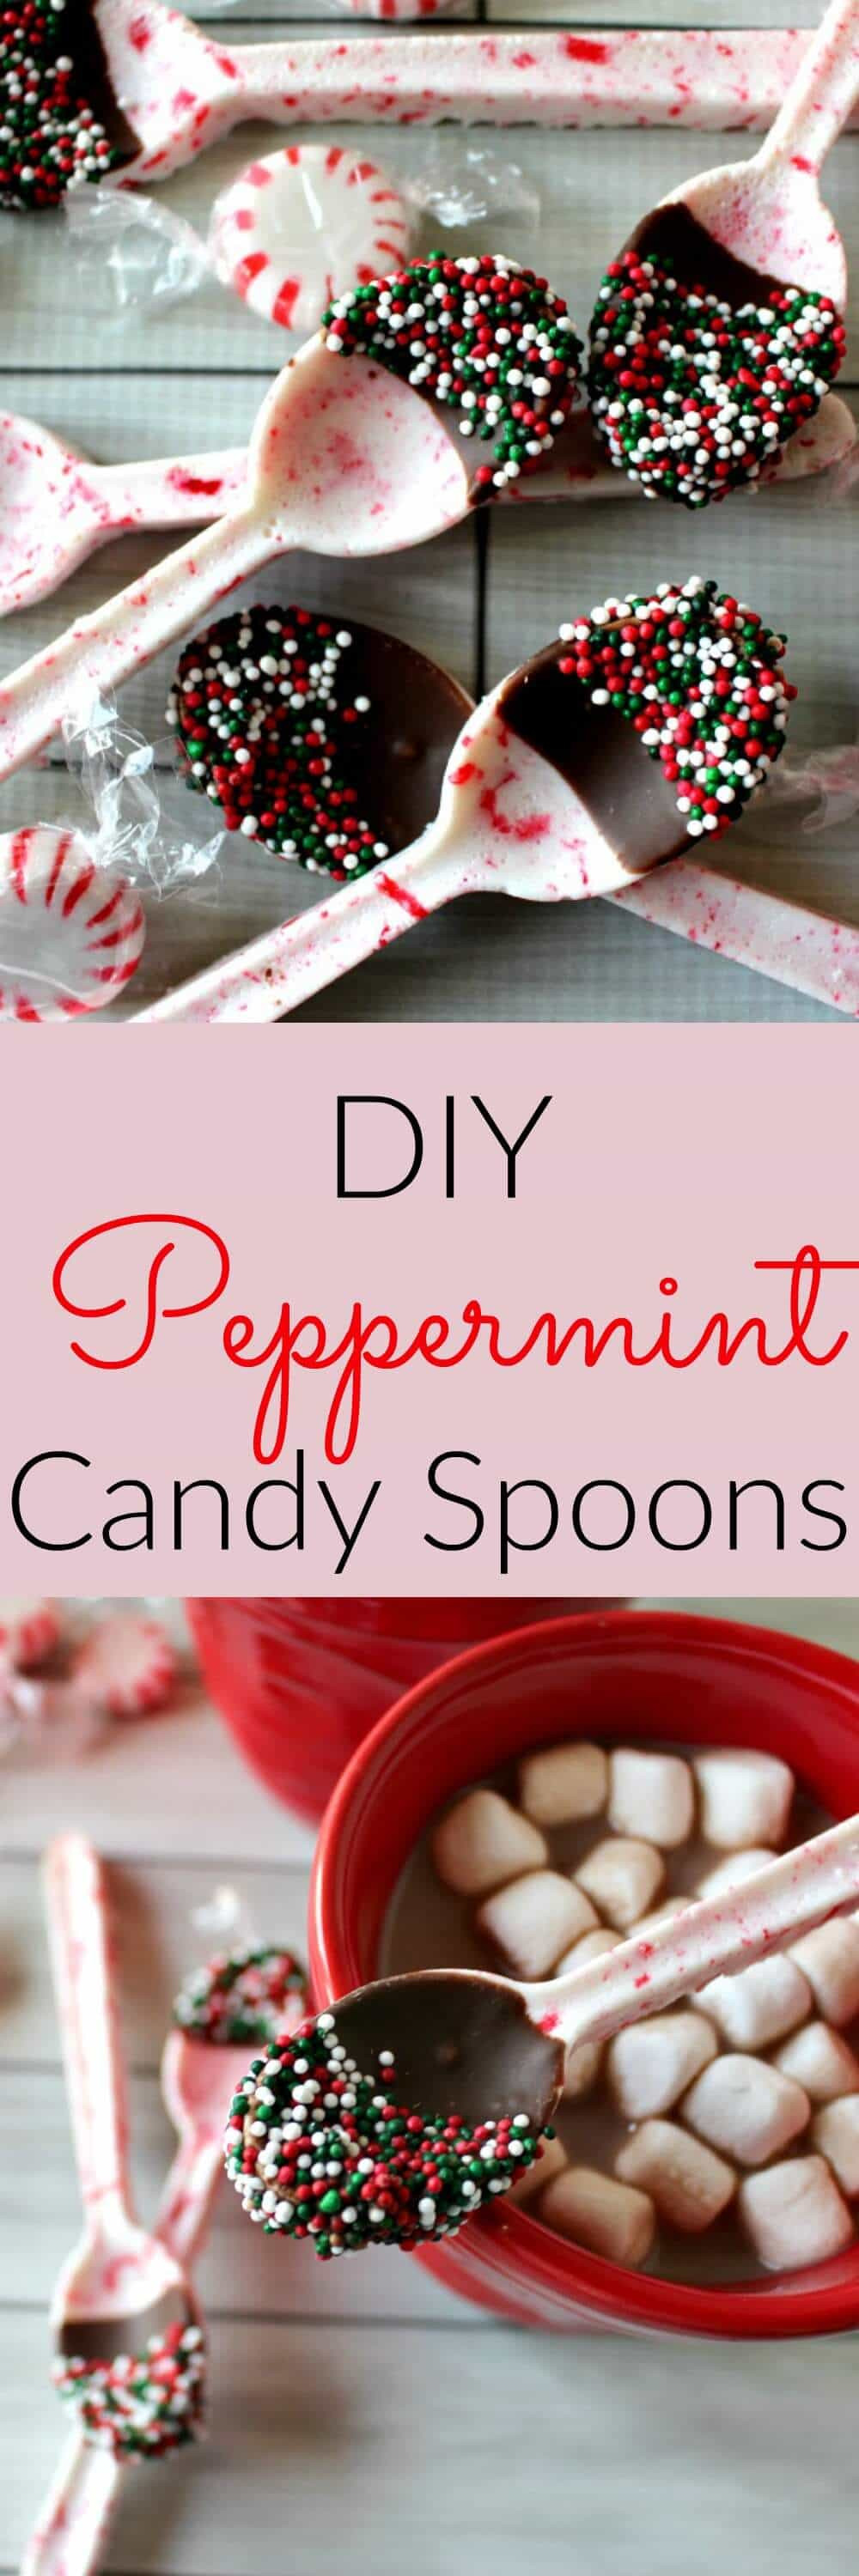 Pinterest Christmas Candy
 DIY Peppermint Candy Spoons Princess Pinky Girl